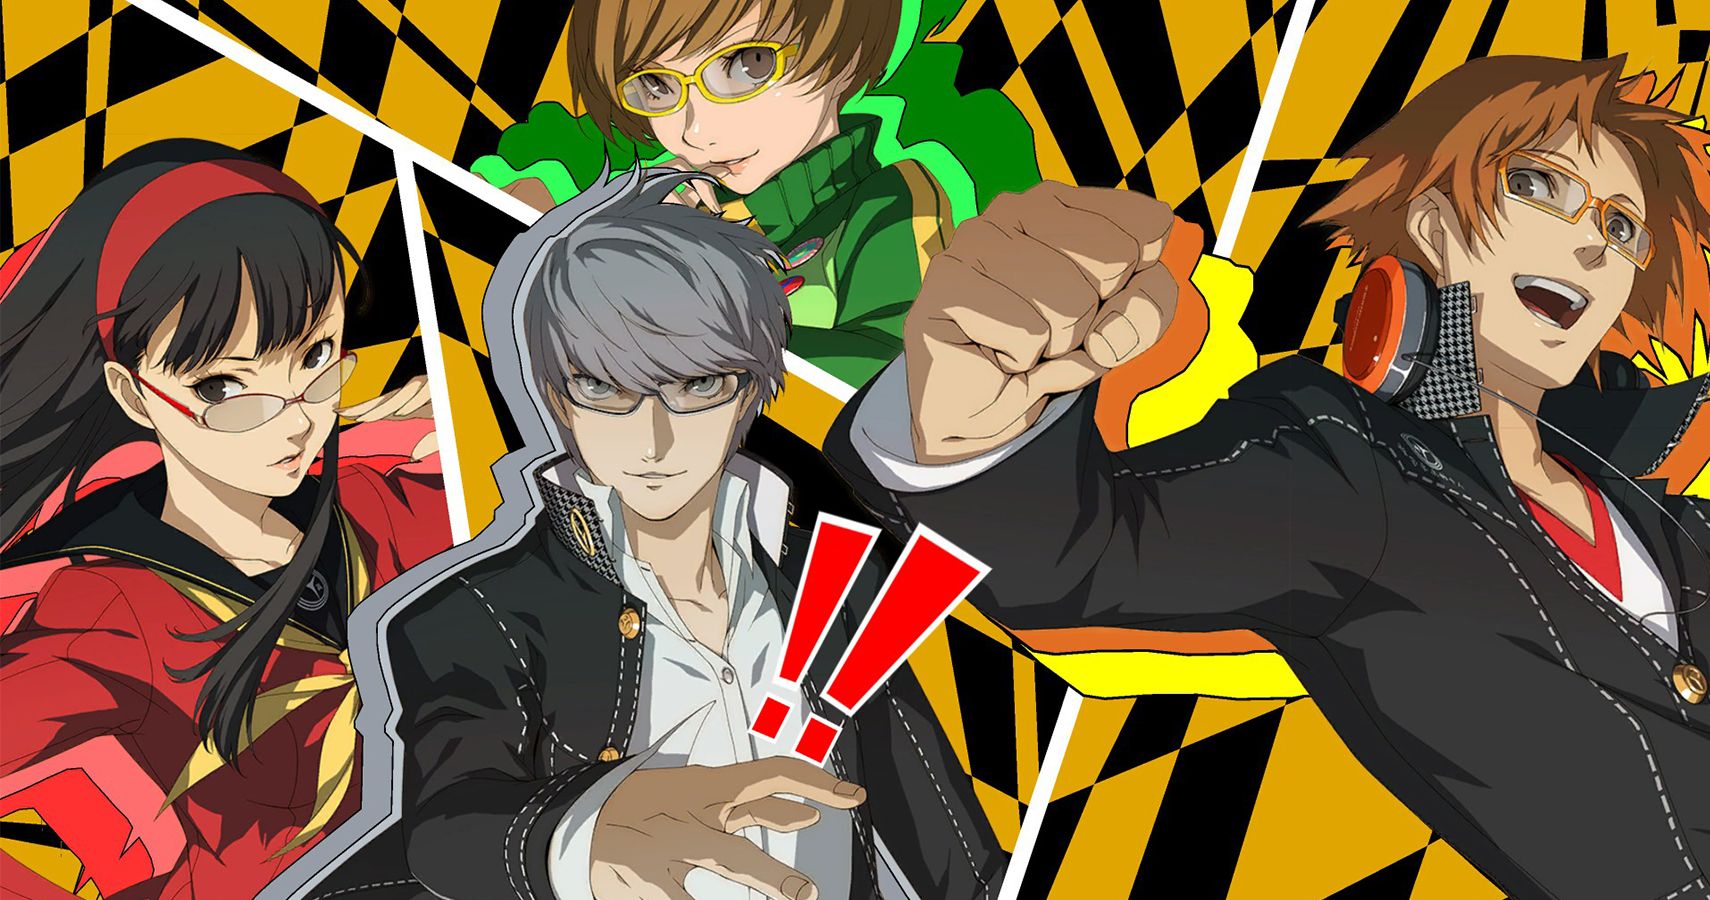 Persona 4 Golden PC Review - Murder In The Boonies